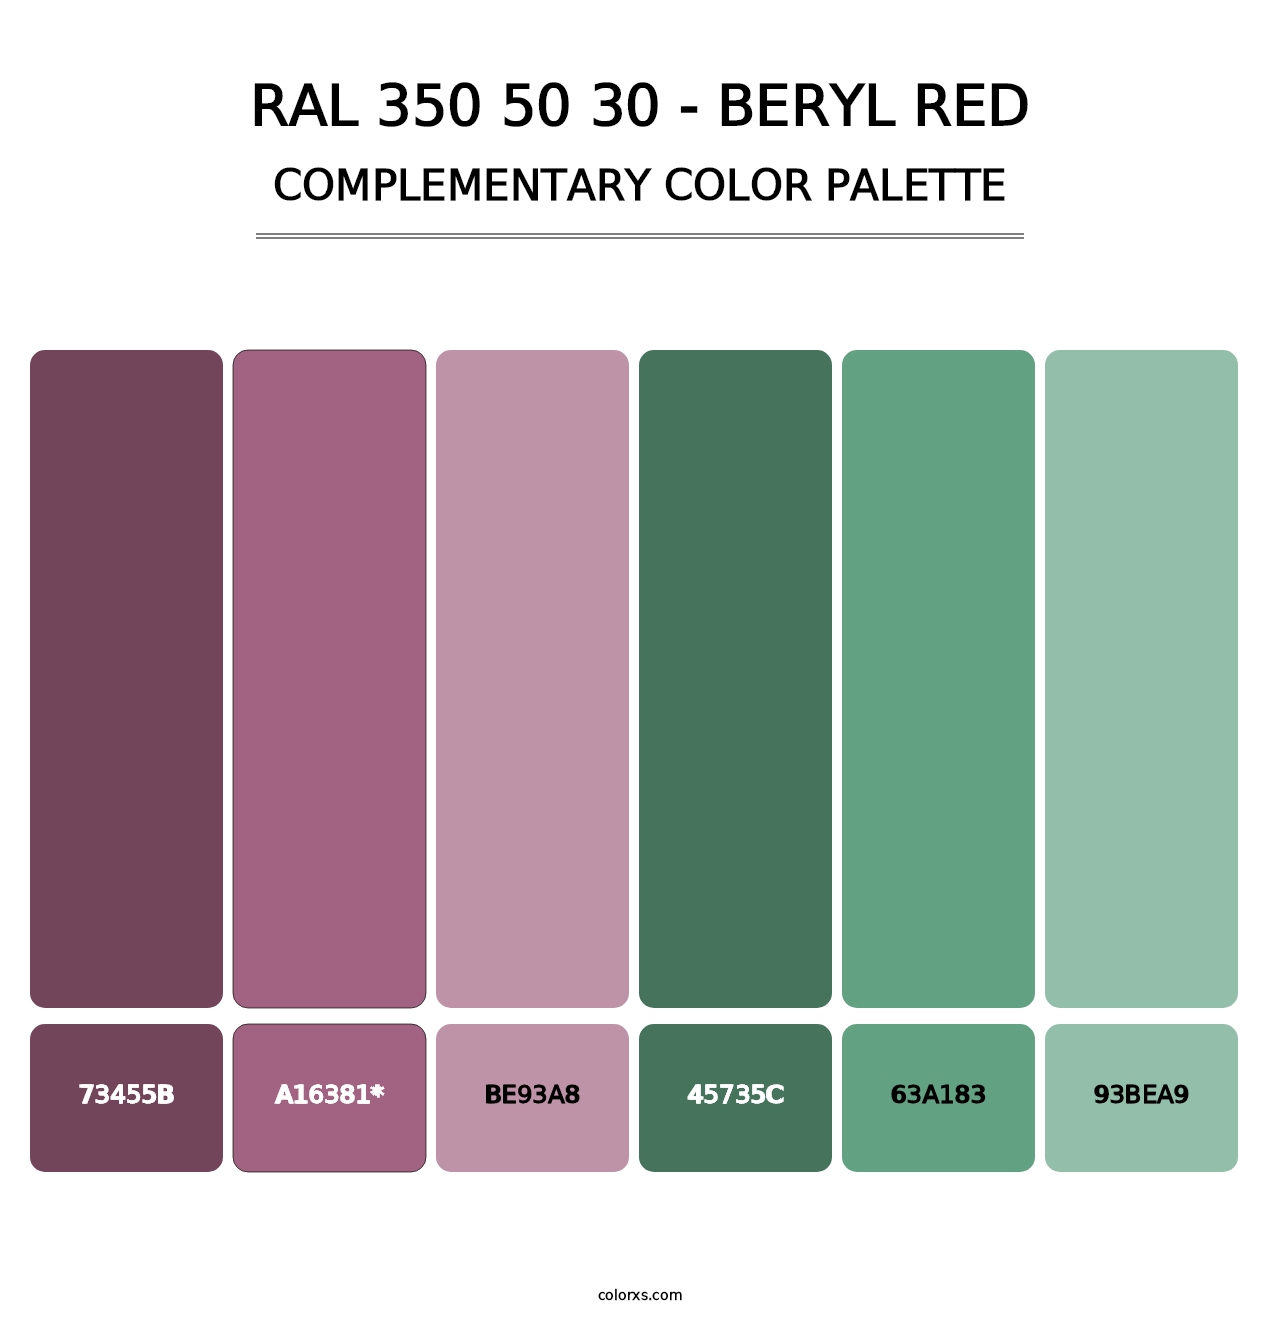 RAL 350 50 30 - Beryl Red - Complementary Color Palette